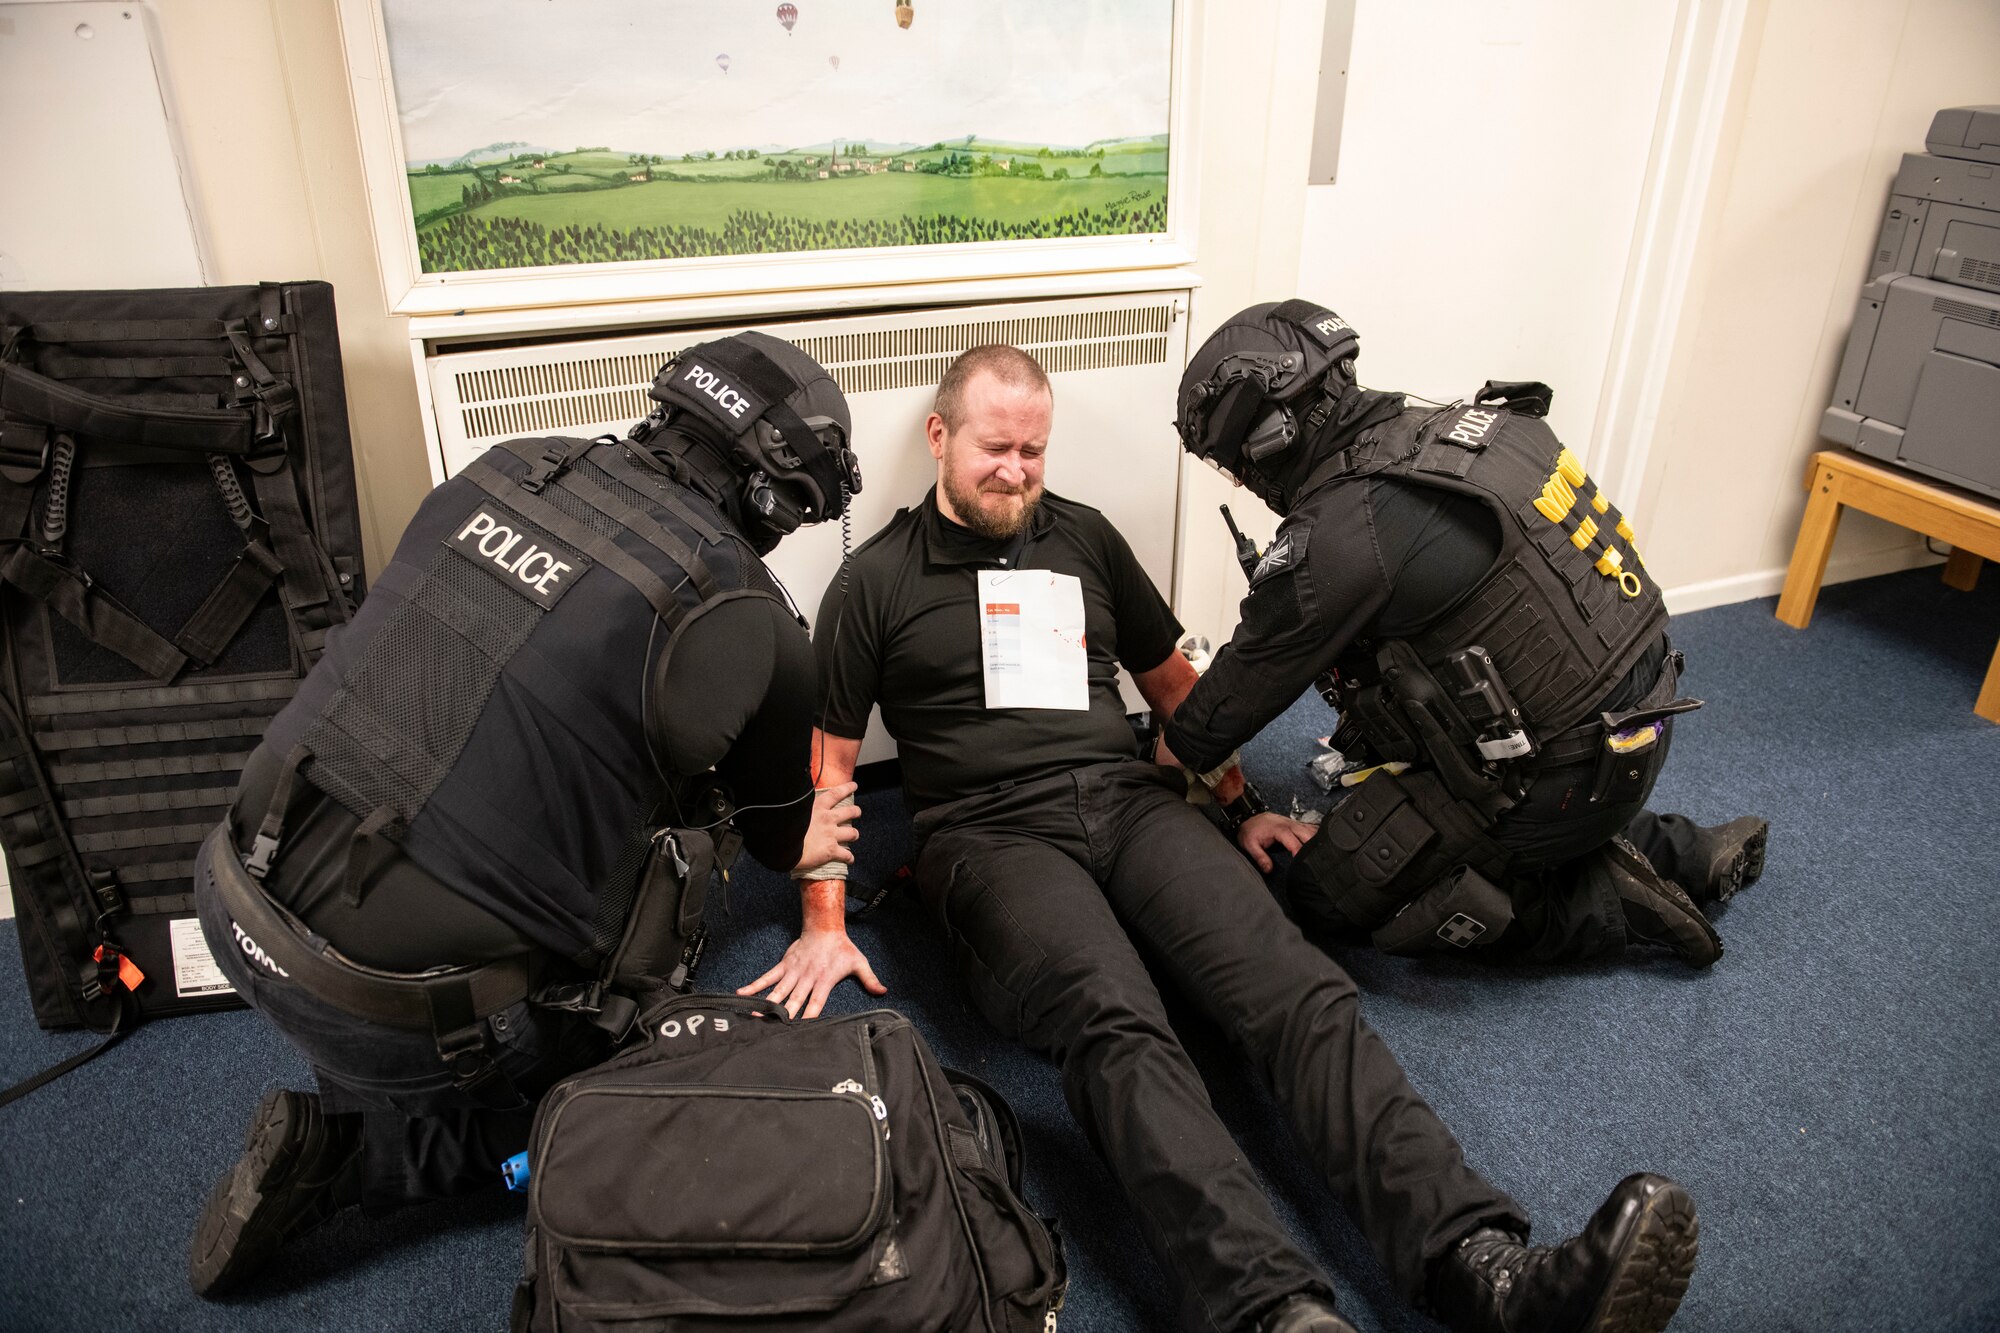 Ministry of Defense Police provide care to a volunteer’s simulated injuries during an exercise at RAF Croughton